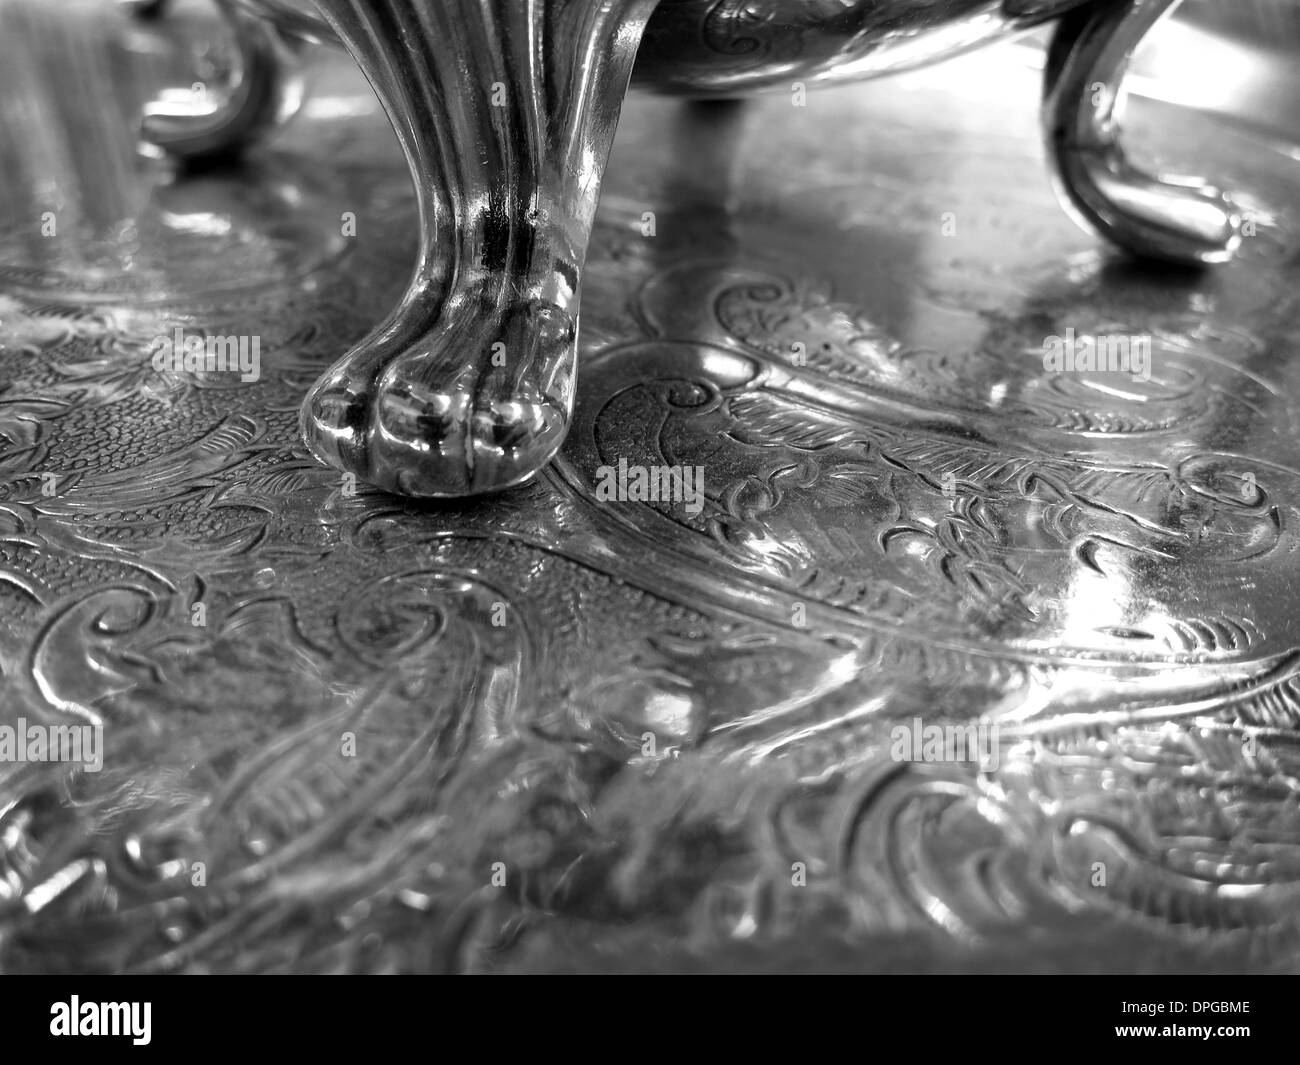 Decorative elegant silver service tray with engravings Stock Photo